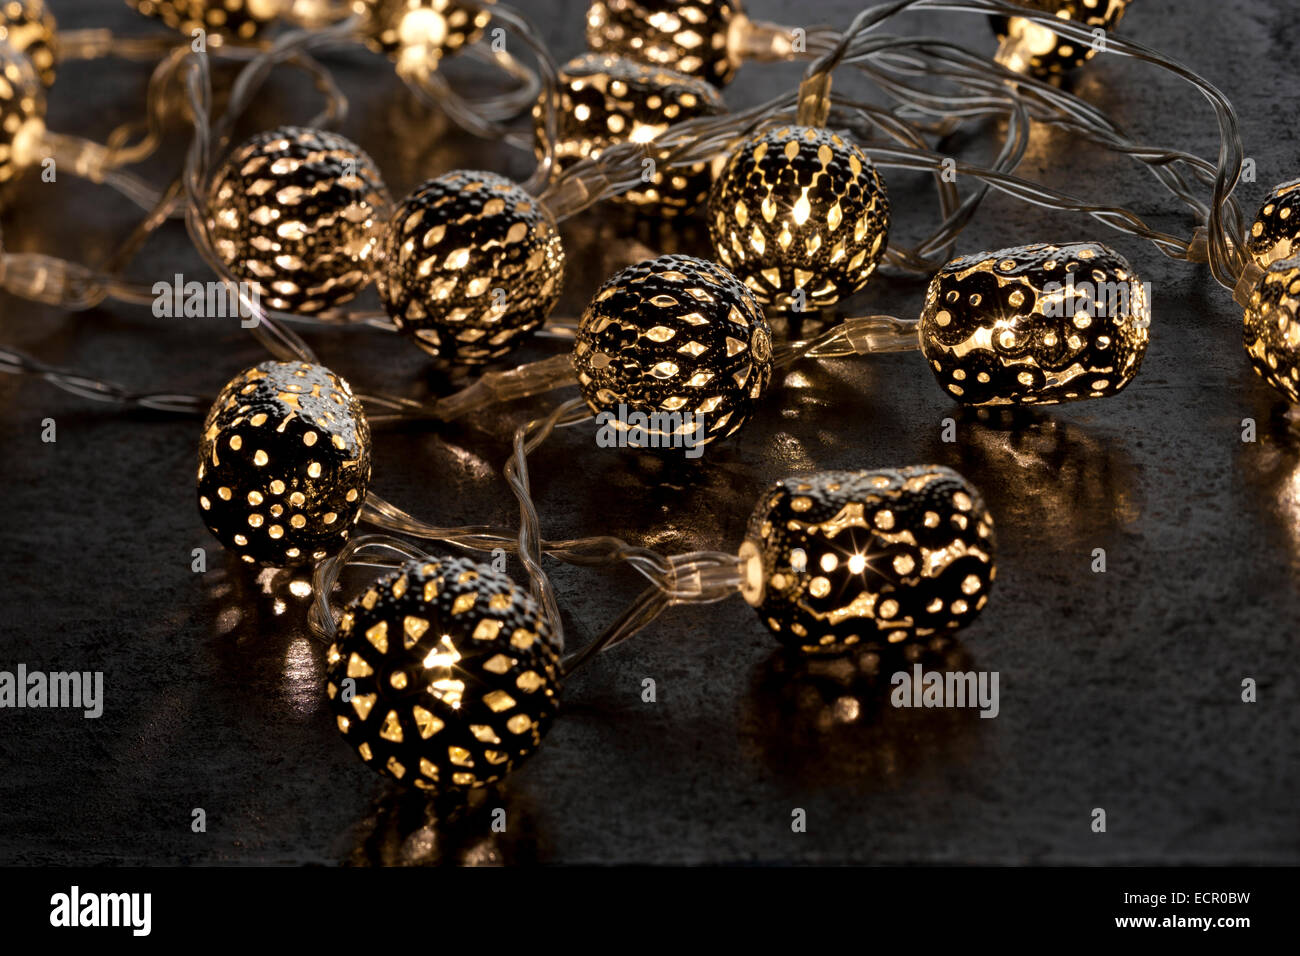 Christmas lights. Silver lanterns made in India, with LED bulbs inside. Stock Photo